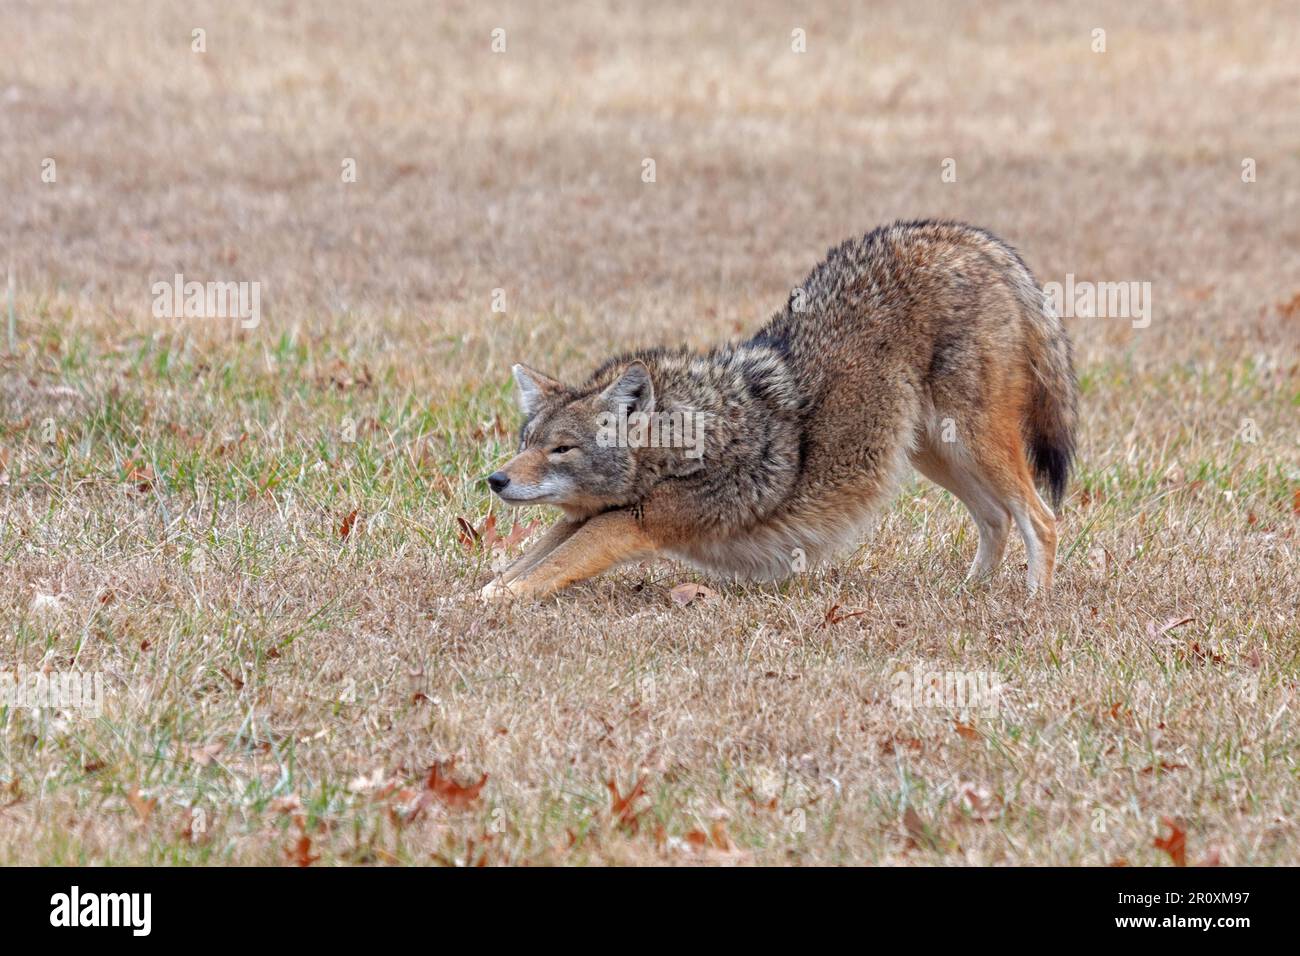 A coyote stretches in an open prairie. Its front paws are down, its  rear end up, as if in a downward dog yoga position. Stock Photo